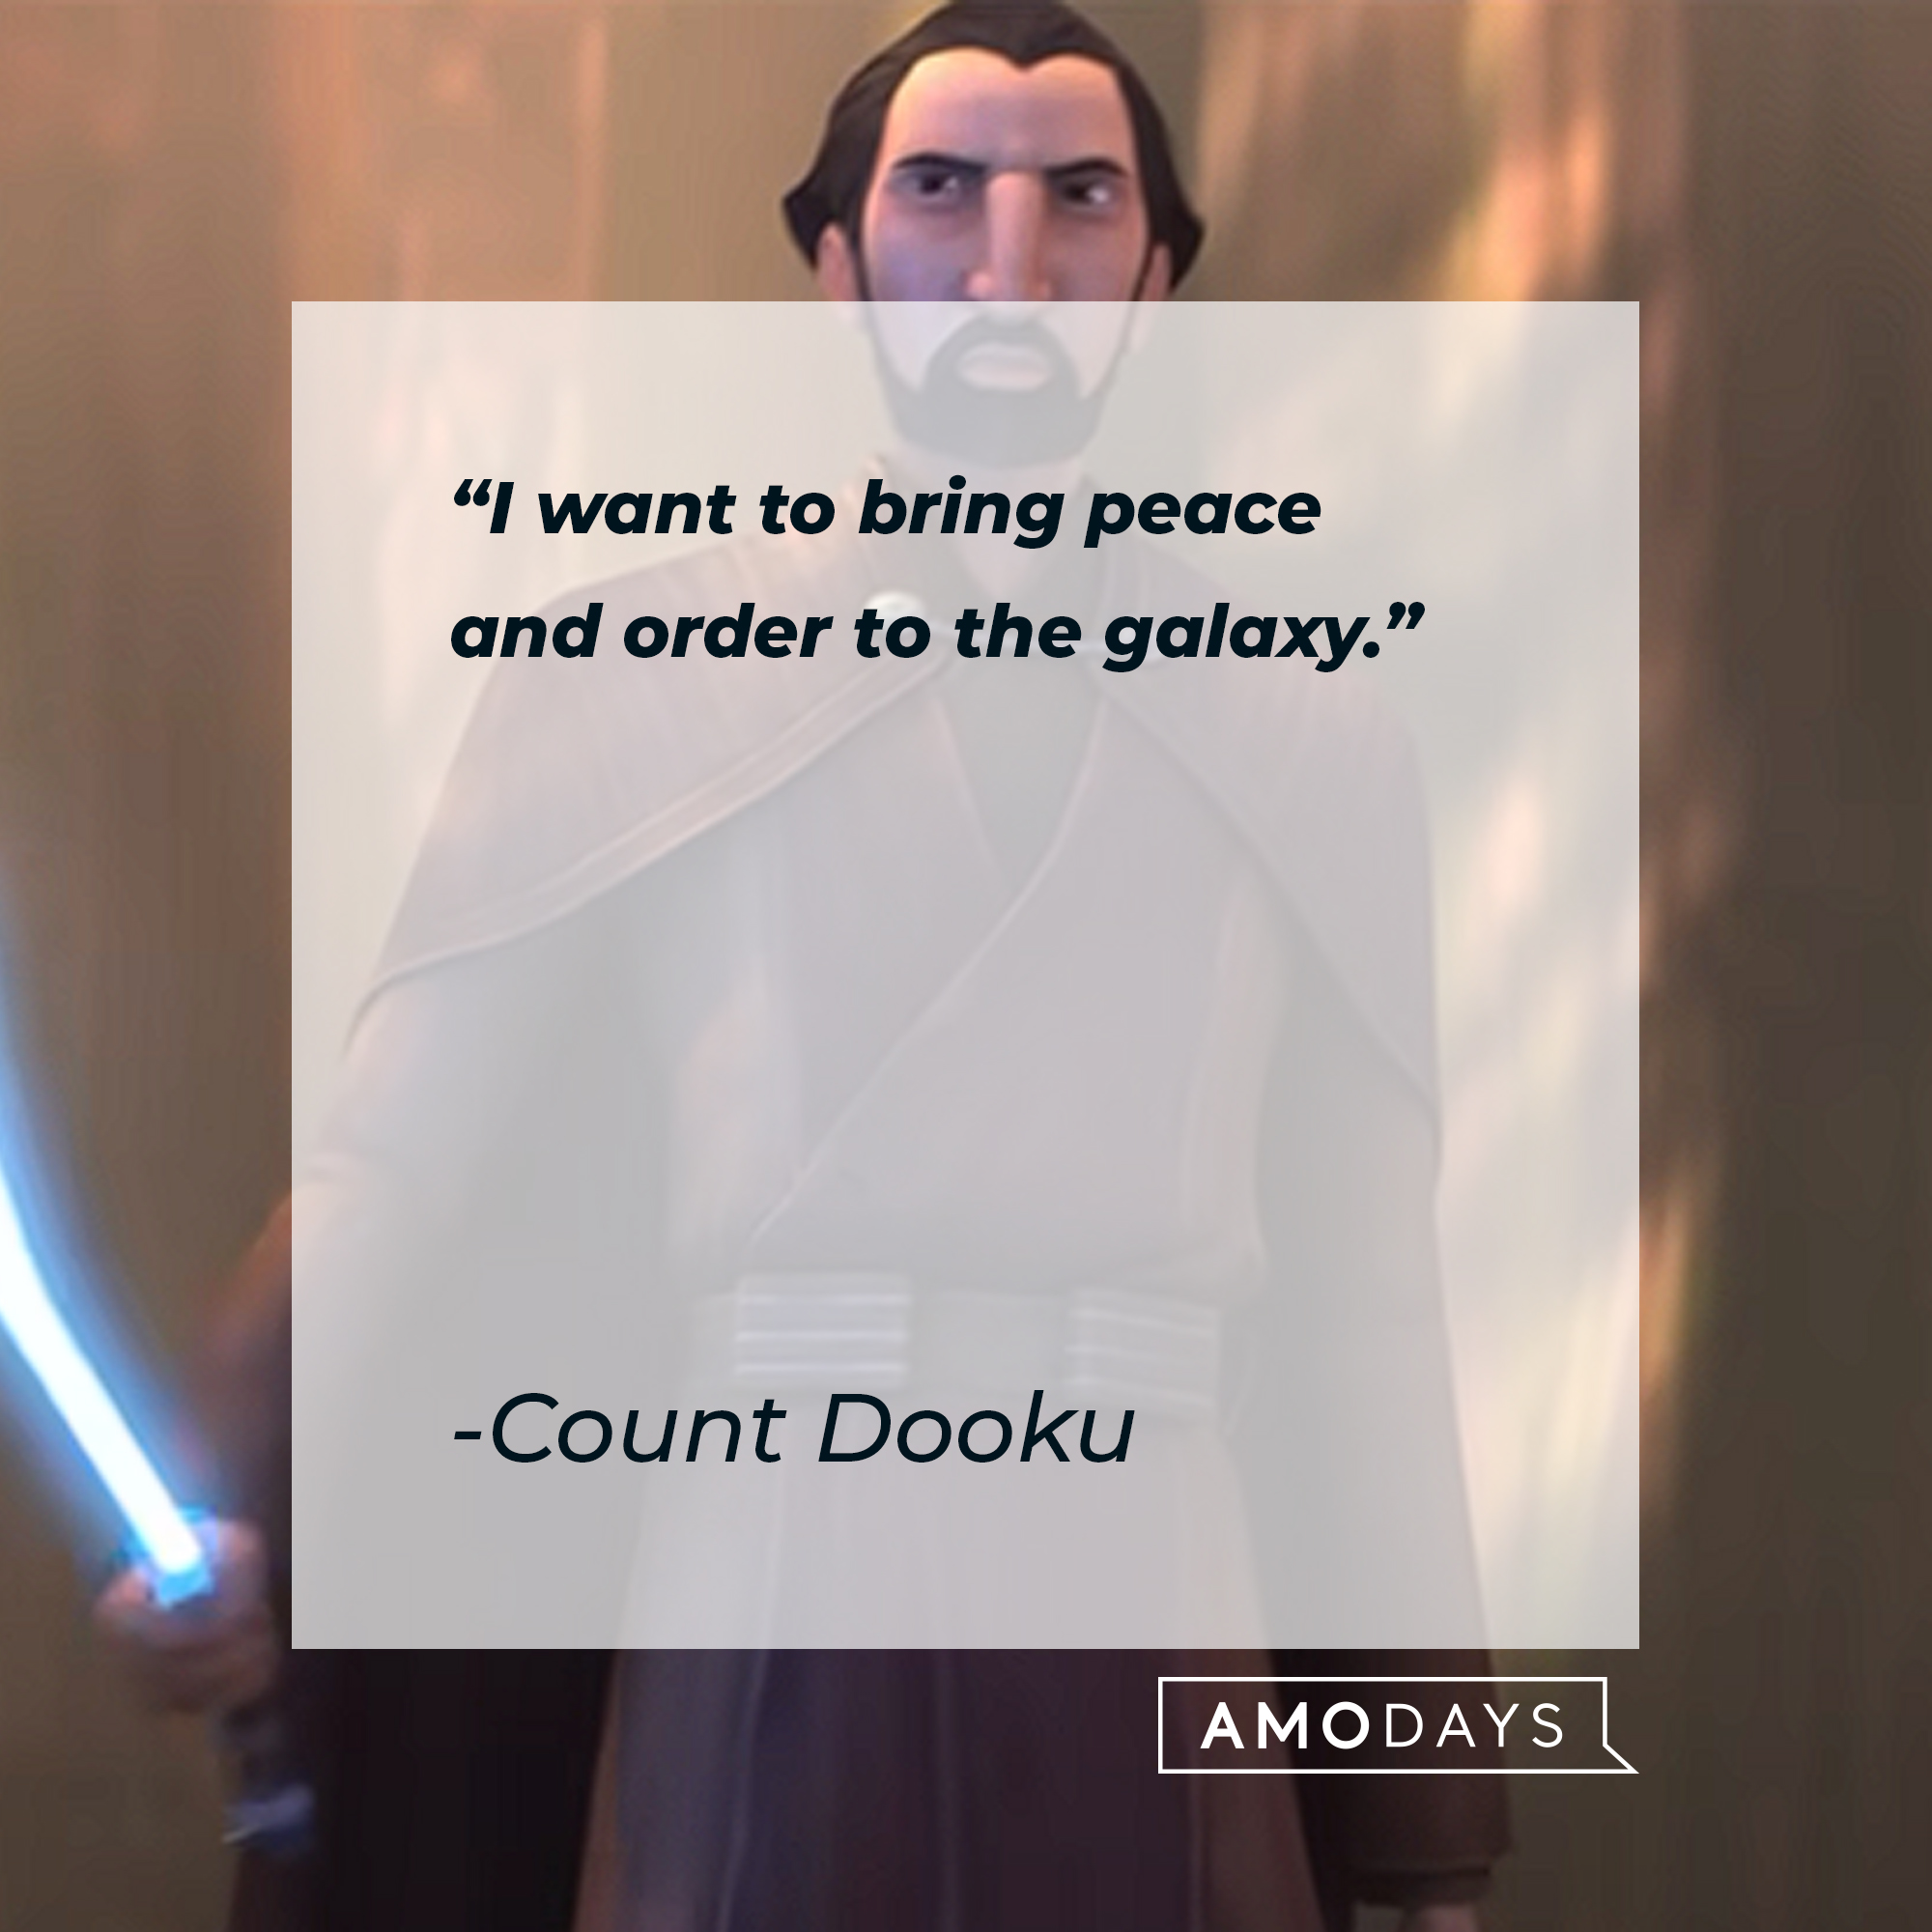 Count Dooku's quote: "I want to bring peace and order to the galaxy." | Source: youtu